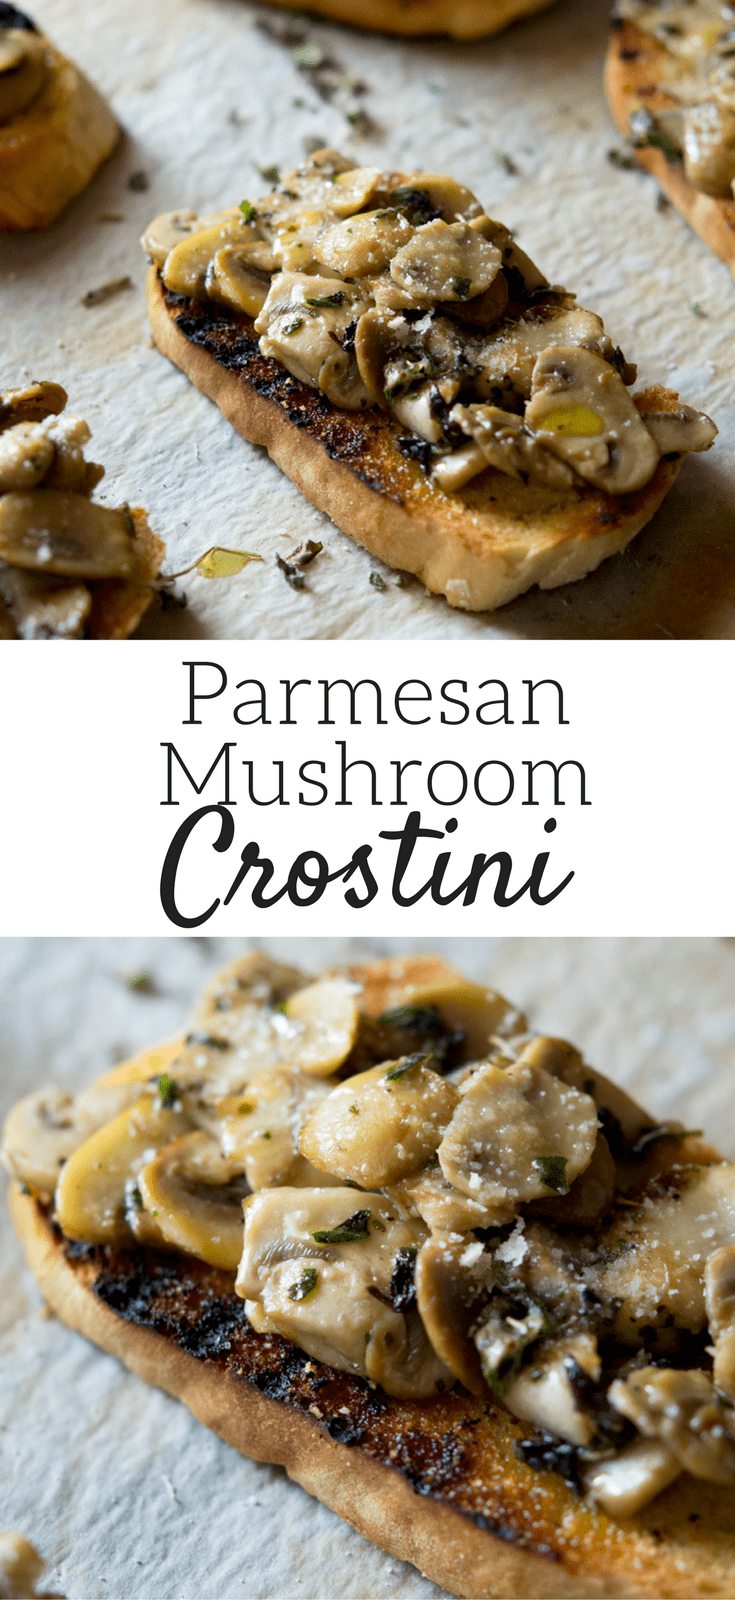 Parmesan mushroom crostini recipe with parmesan cheese, mushrooms, oregano and garlic toasts. An easy and delicious Italian appetizer.